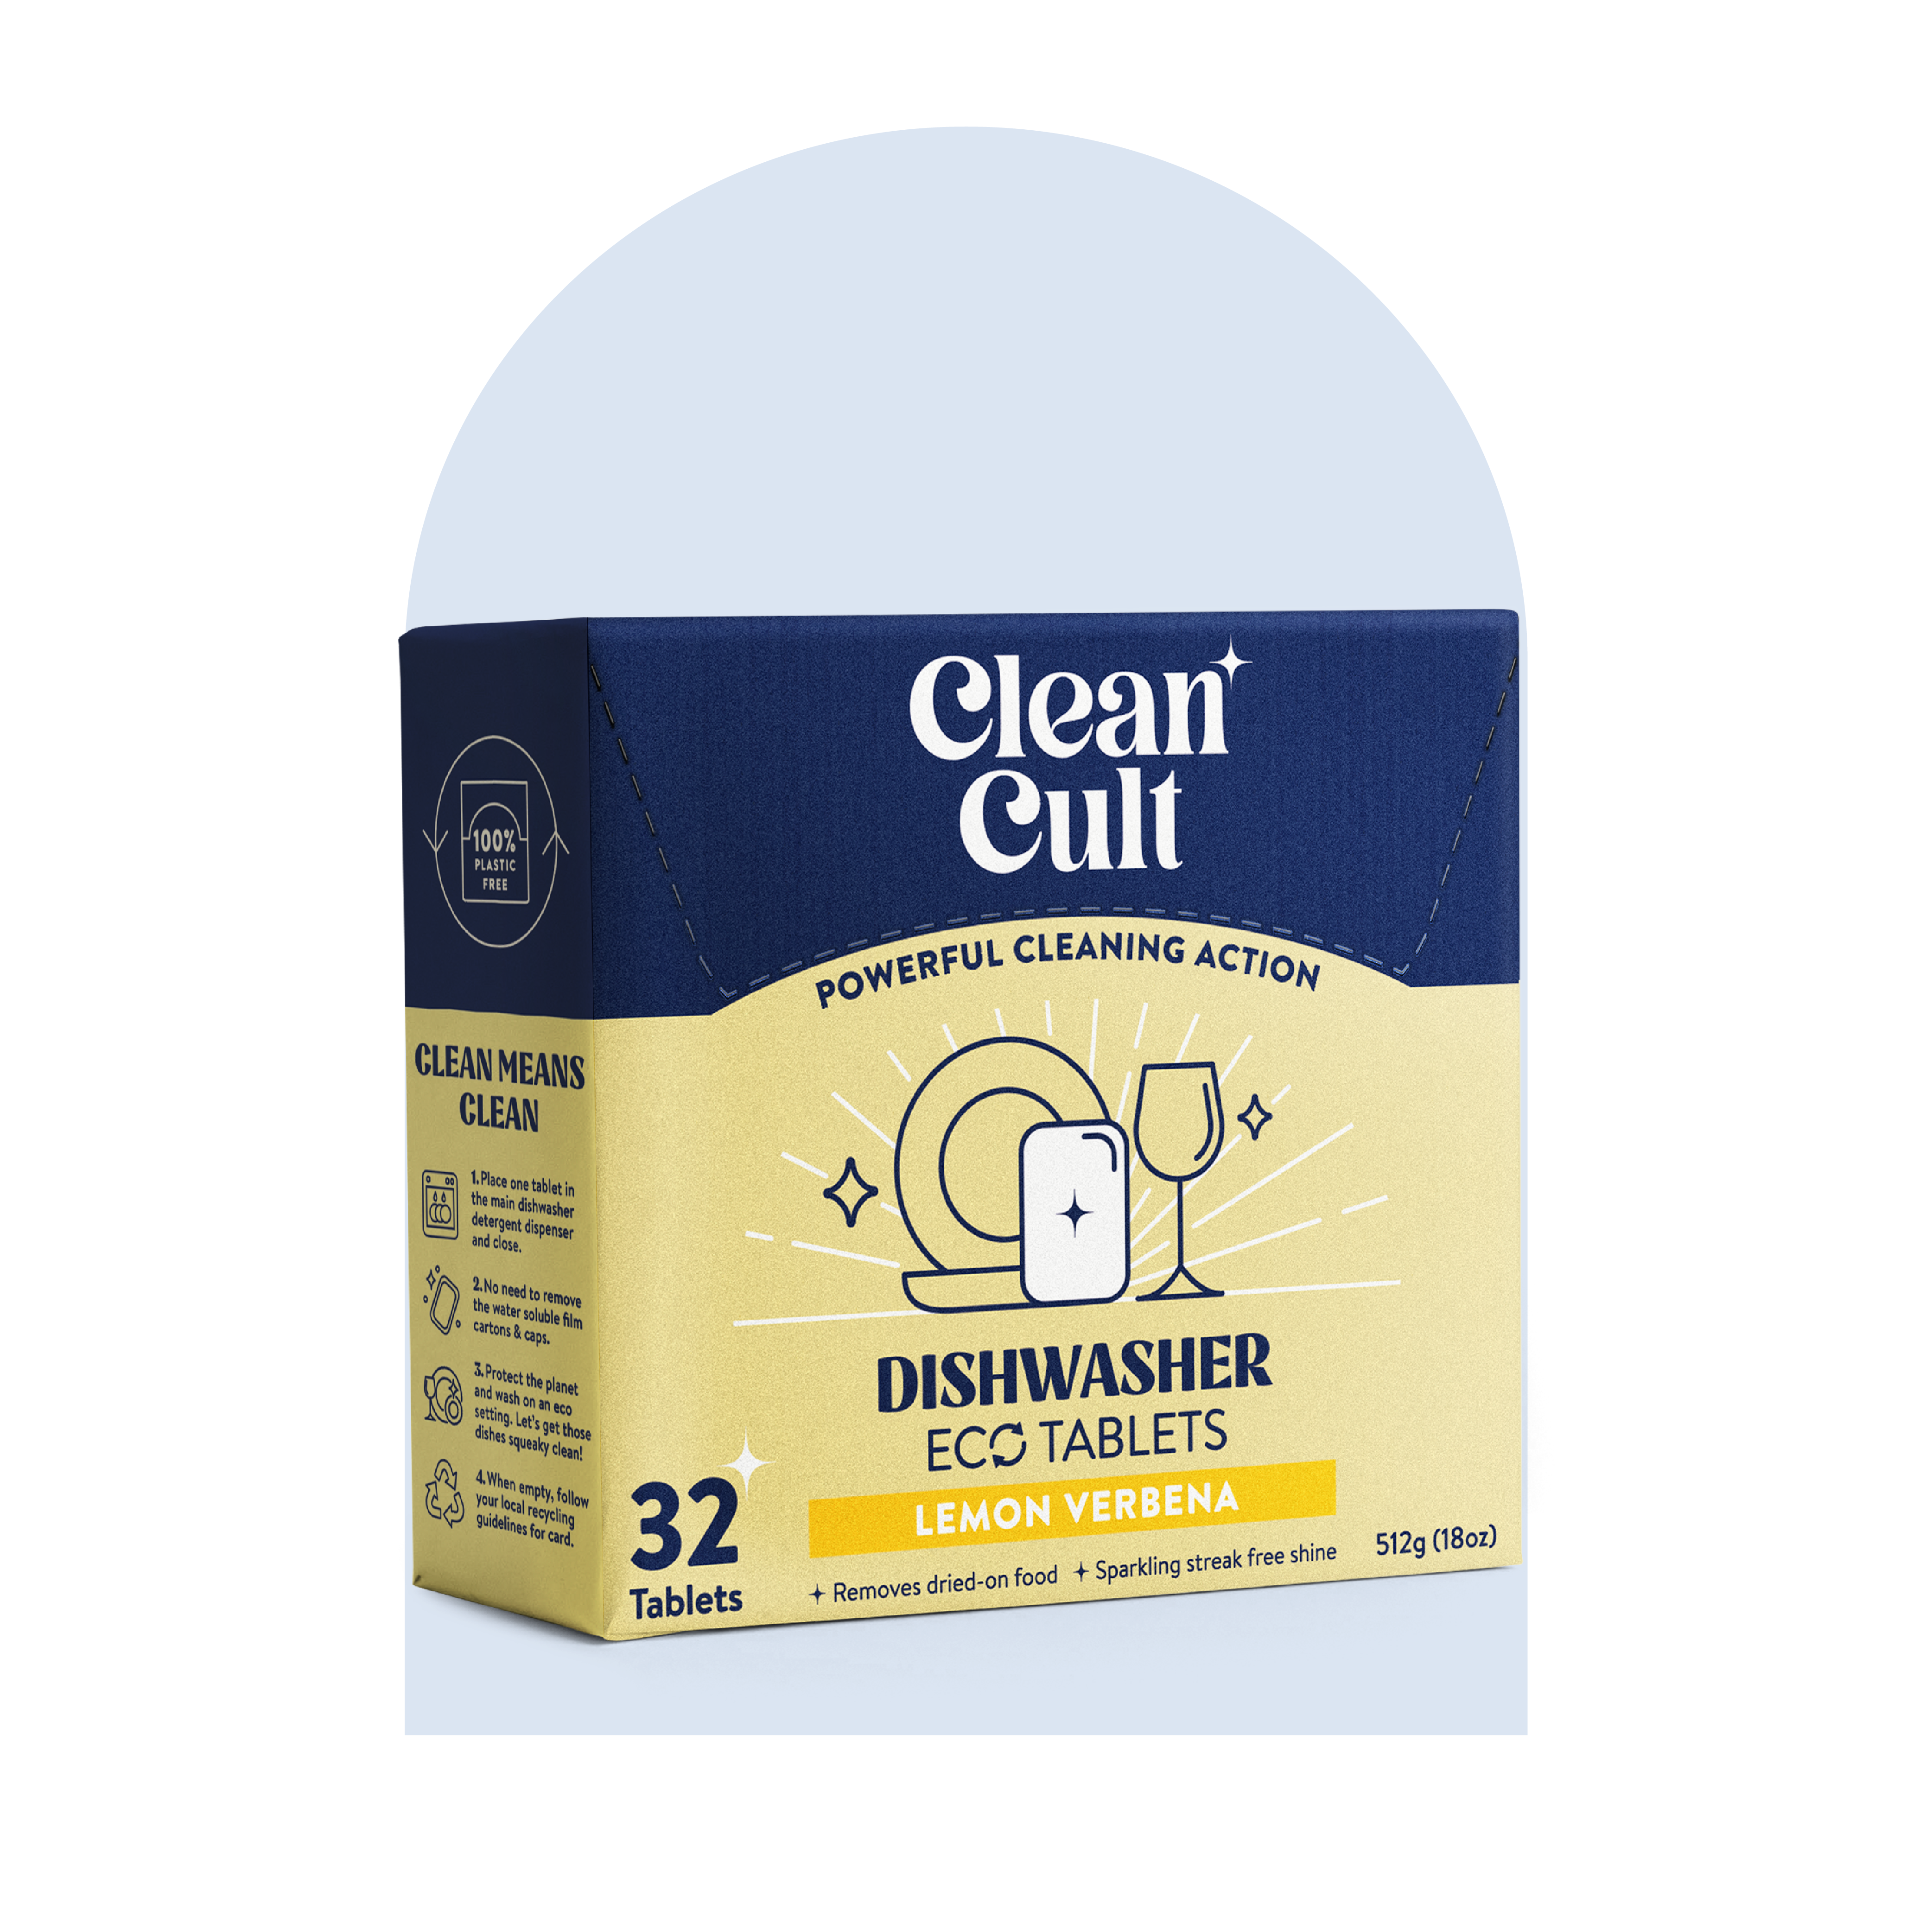 We bought Cleancult's dishwasher tablets and refillable container, here's  what we thought — The Reduce Report